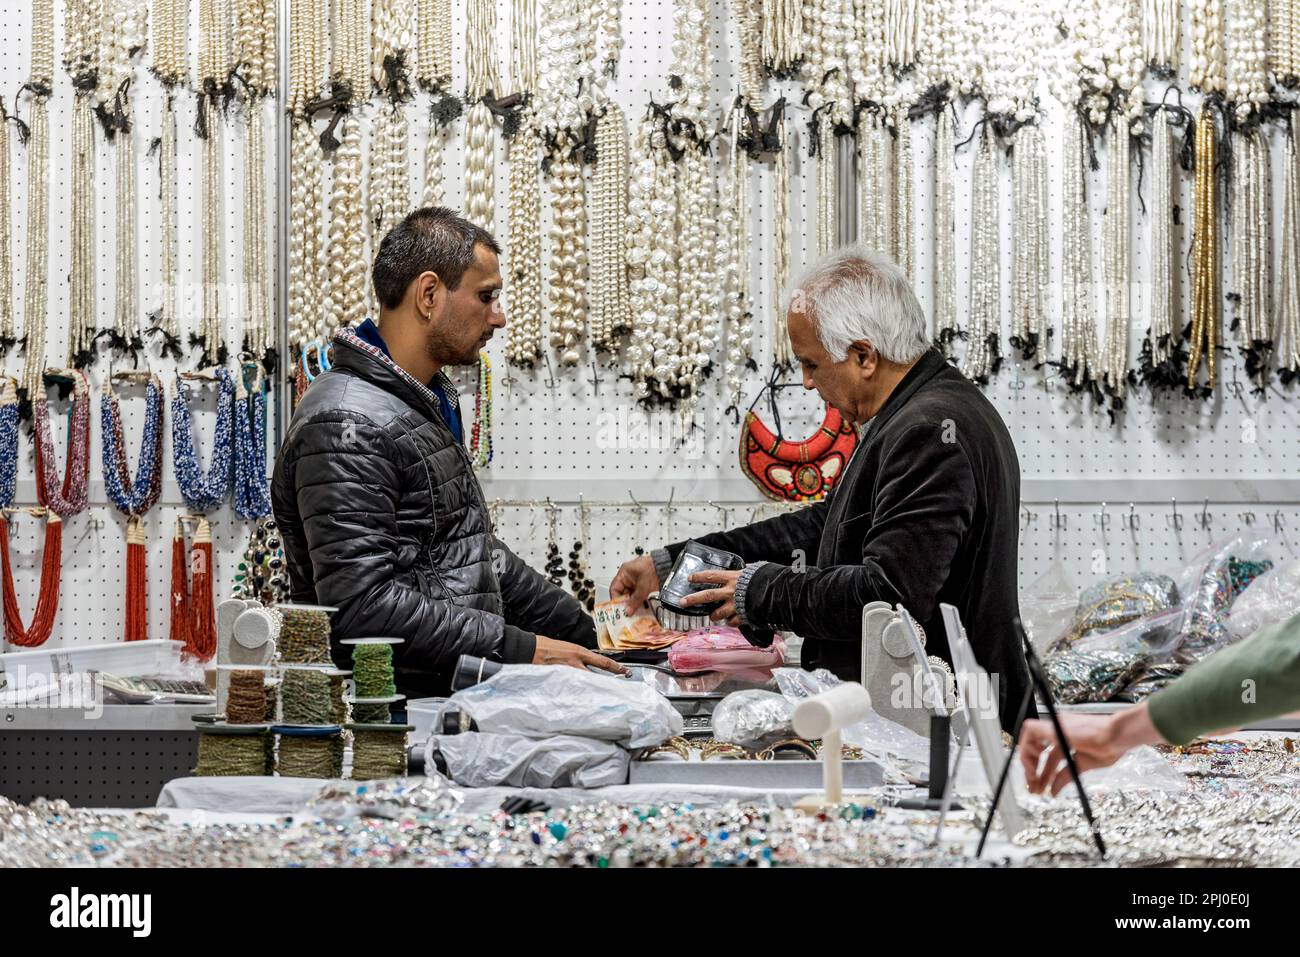 Men paying in cash at trade fair stand for minerals, gemstones, pearl necklaces, stone necklaces, womans hand grabs goods unnoticed, Inhorgenta Stock Photo